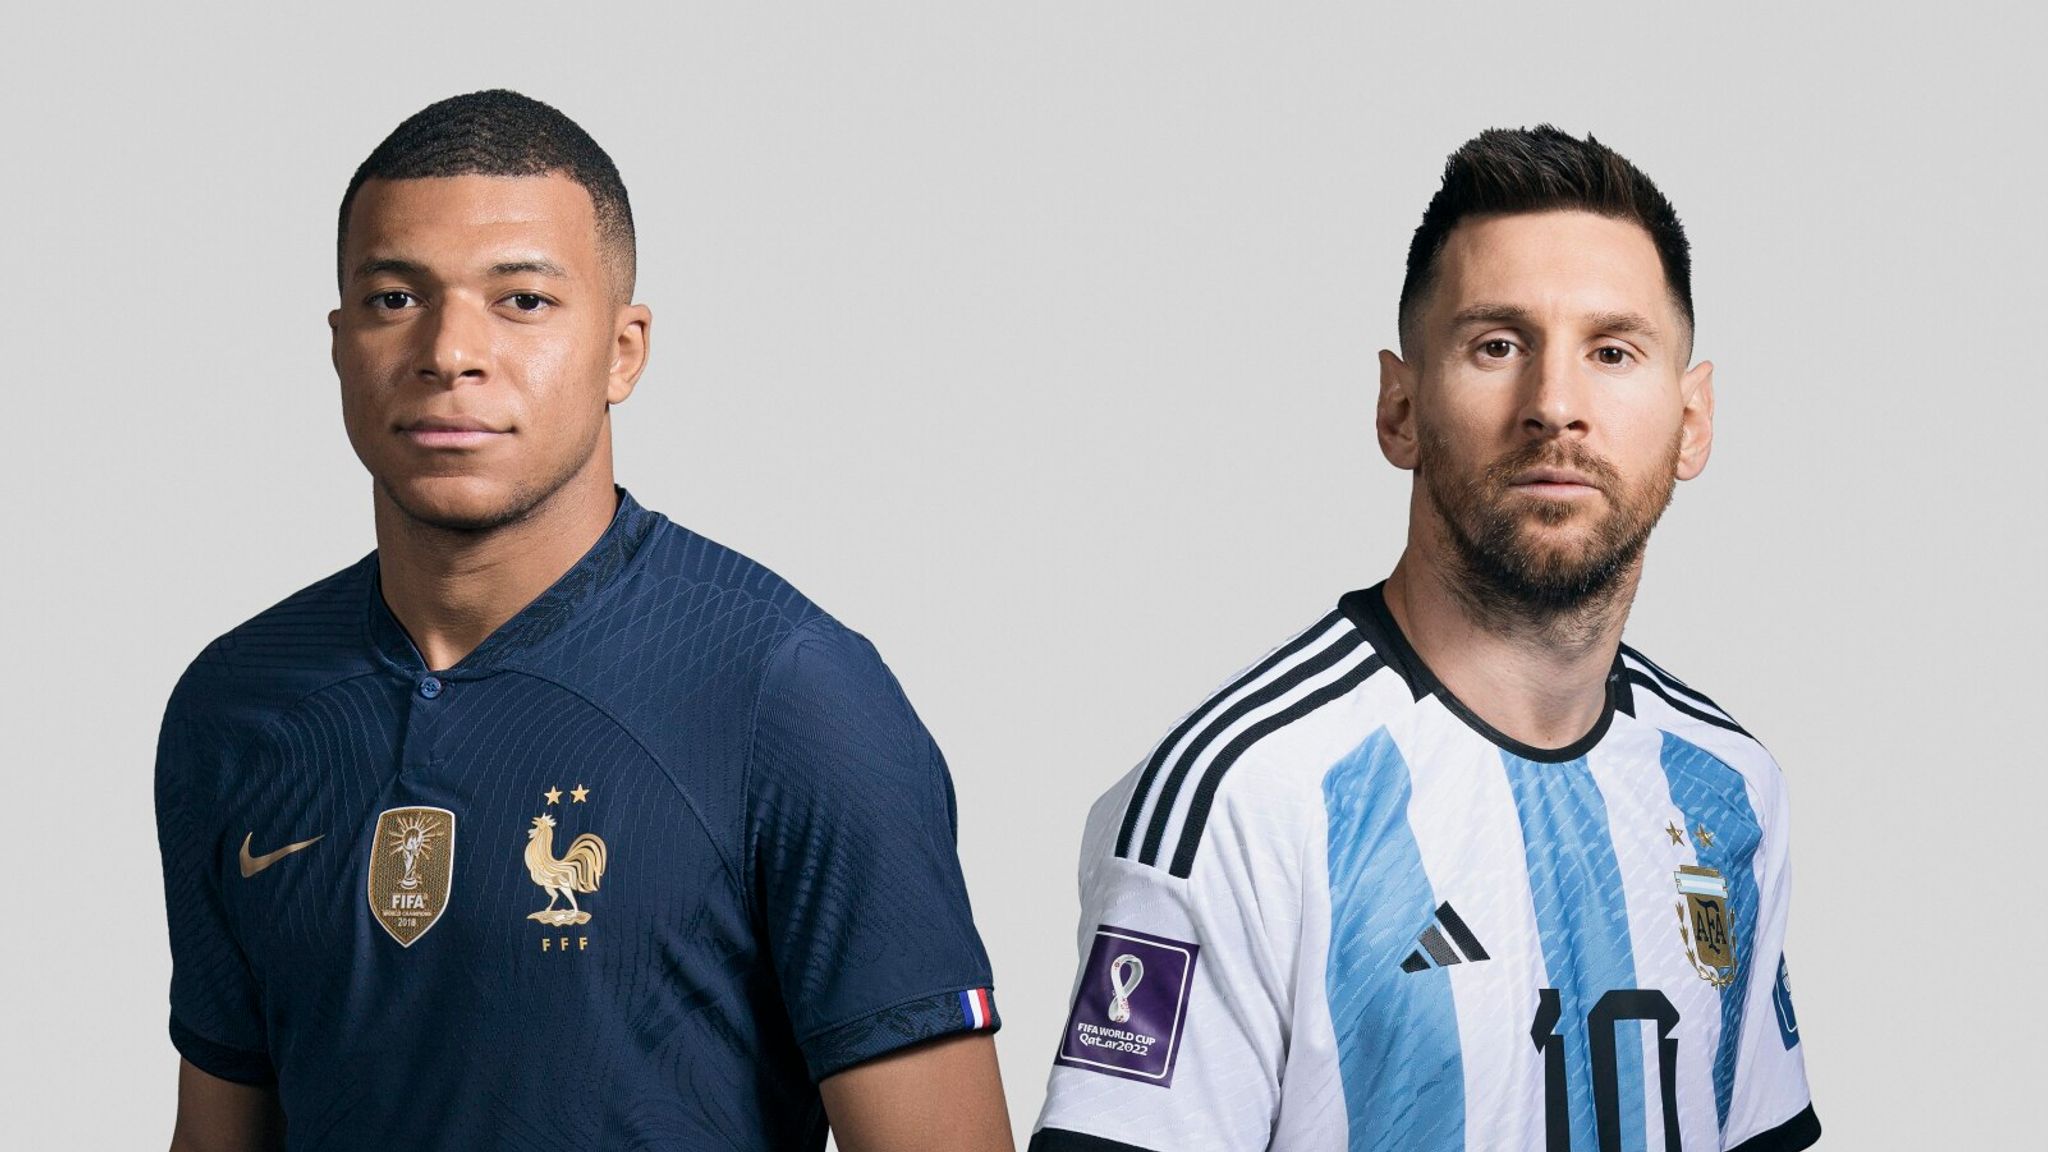 'There is NO problem with Kylian,' Lionel Messi claims, insisting that his World Cup success has not harmed his friendship with Mbappe.